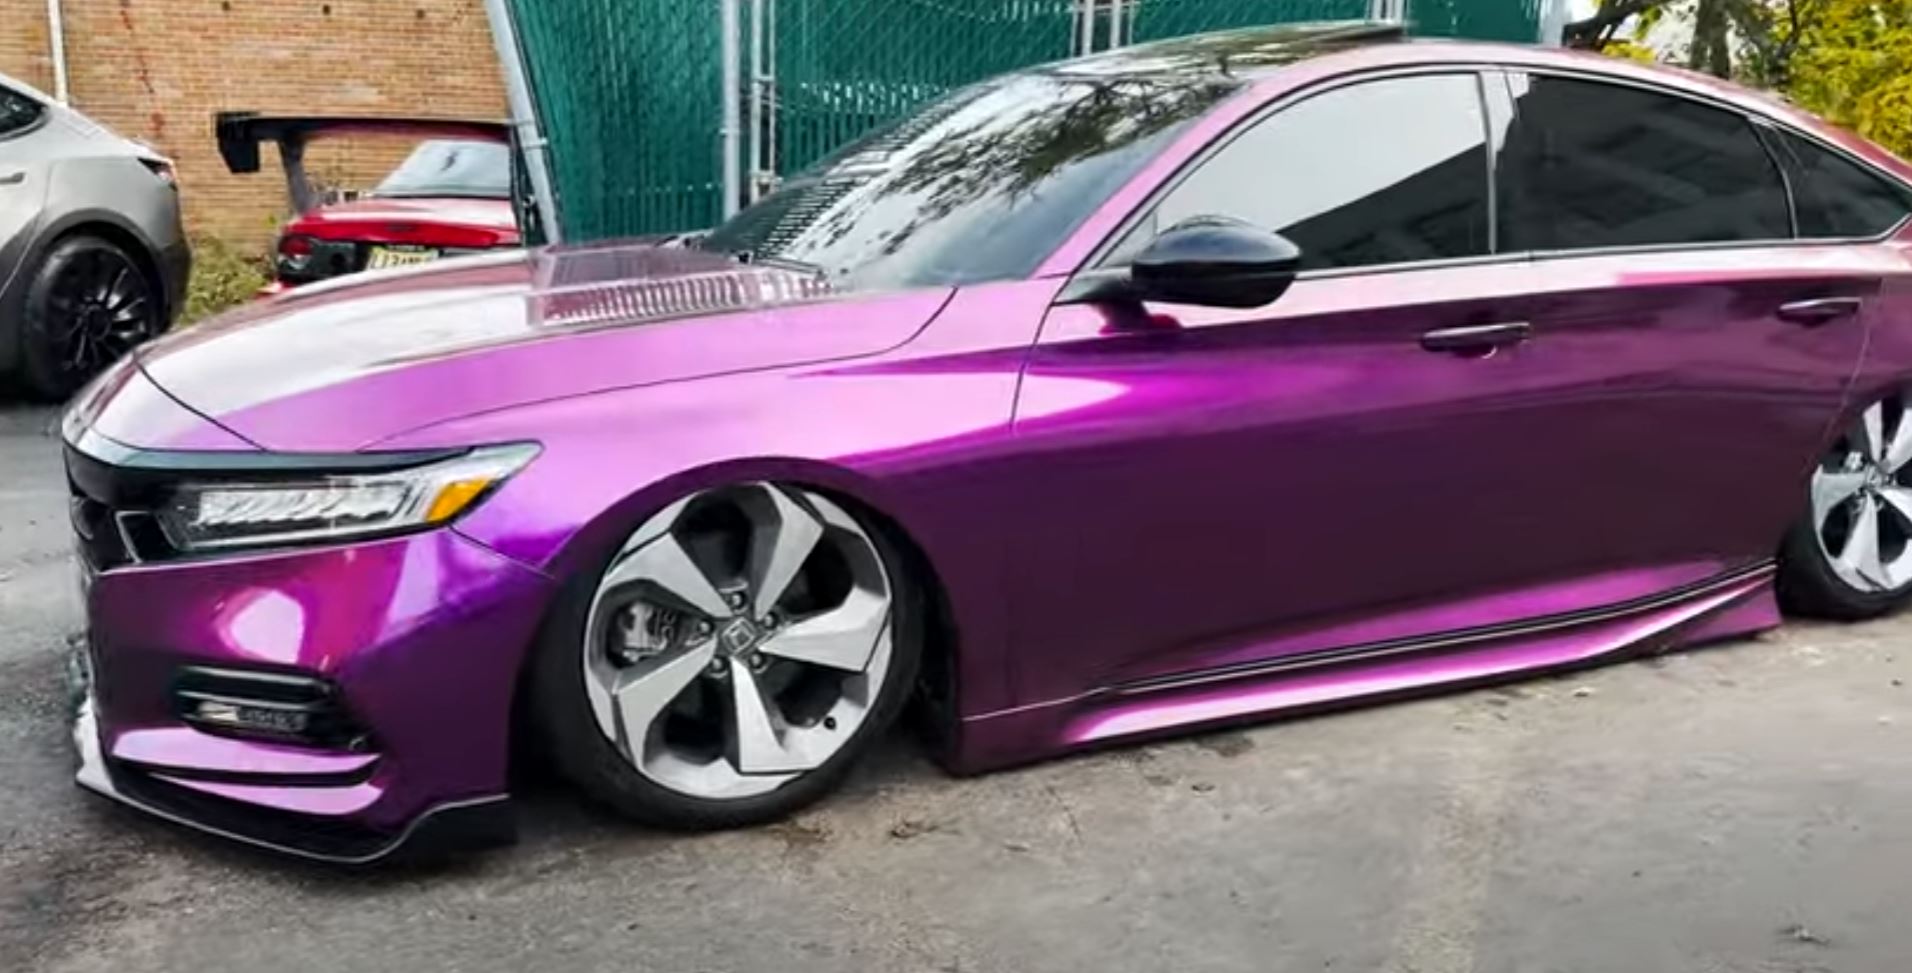 this is a honda civic wrapped in a satin purple photographed from the side